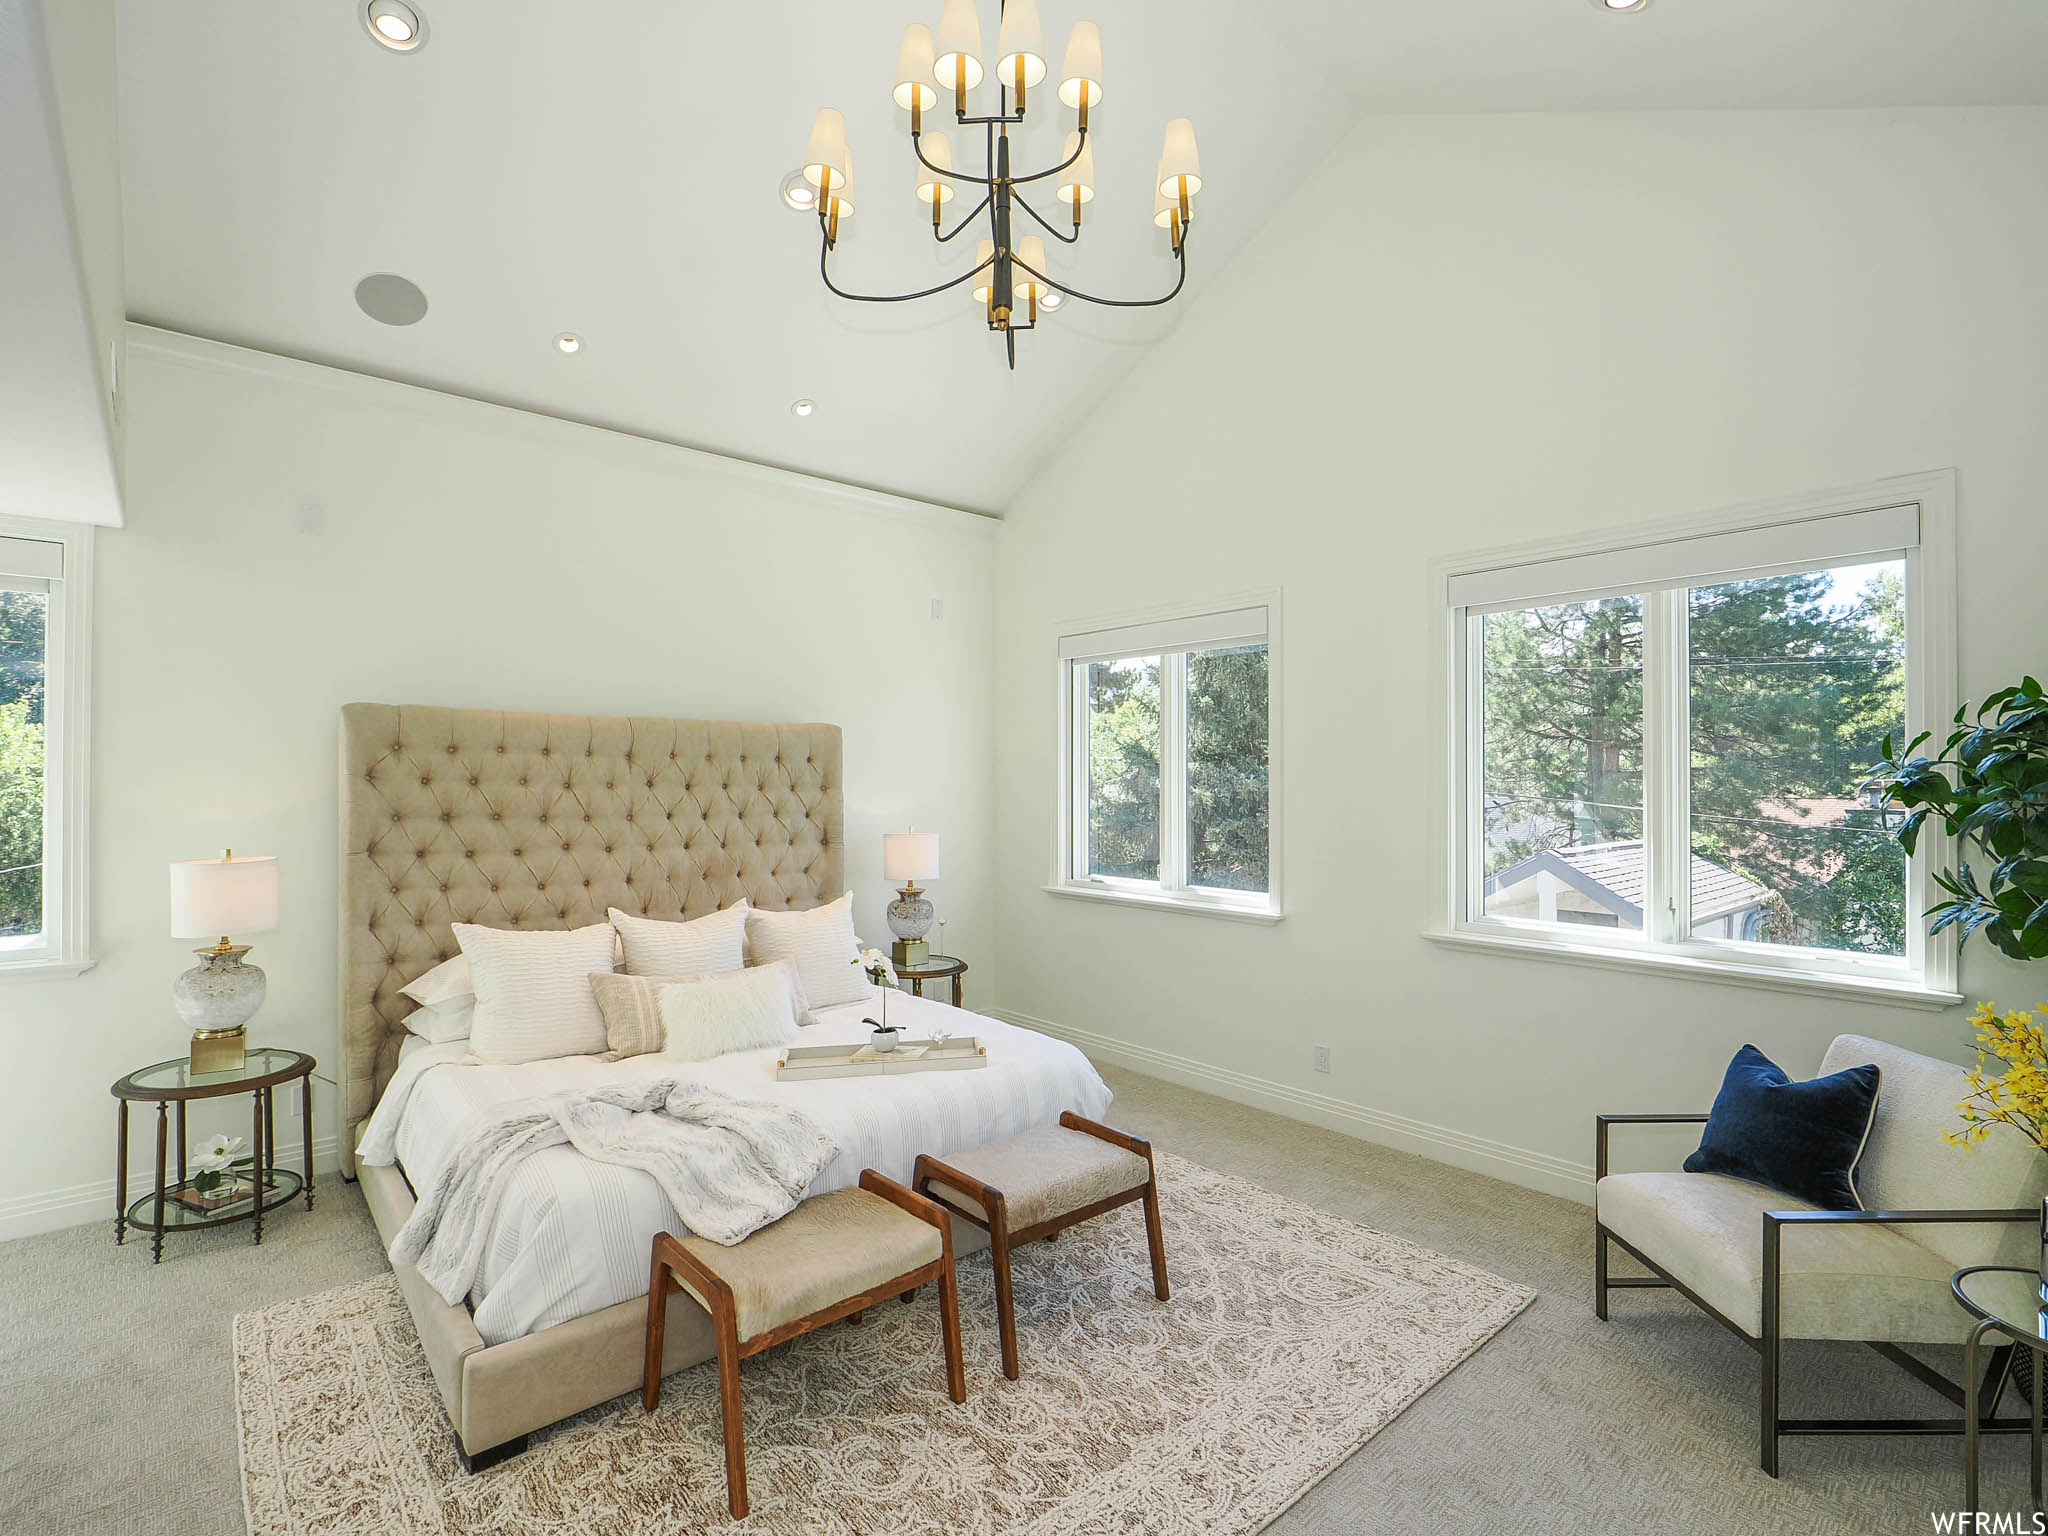 Bedroom with lofted ceiling, light carpet, and a high ceiling